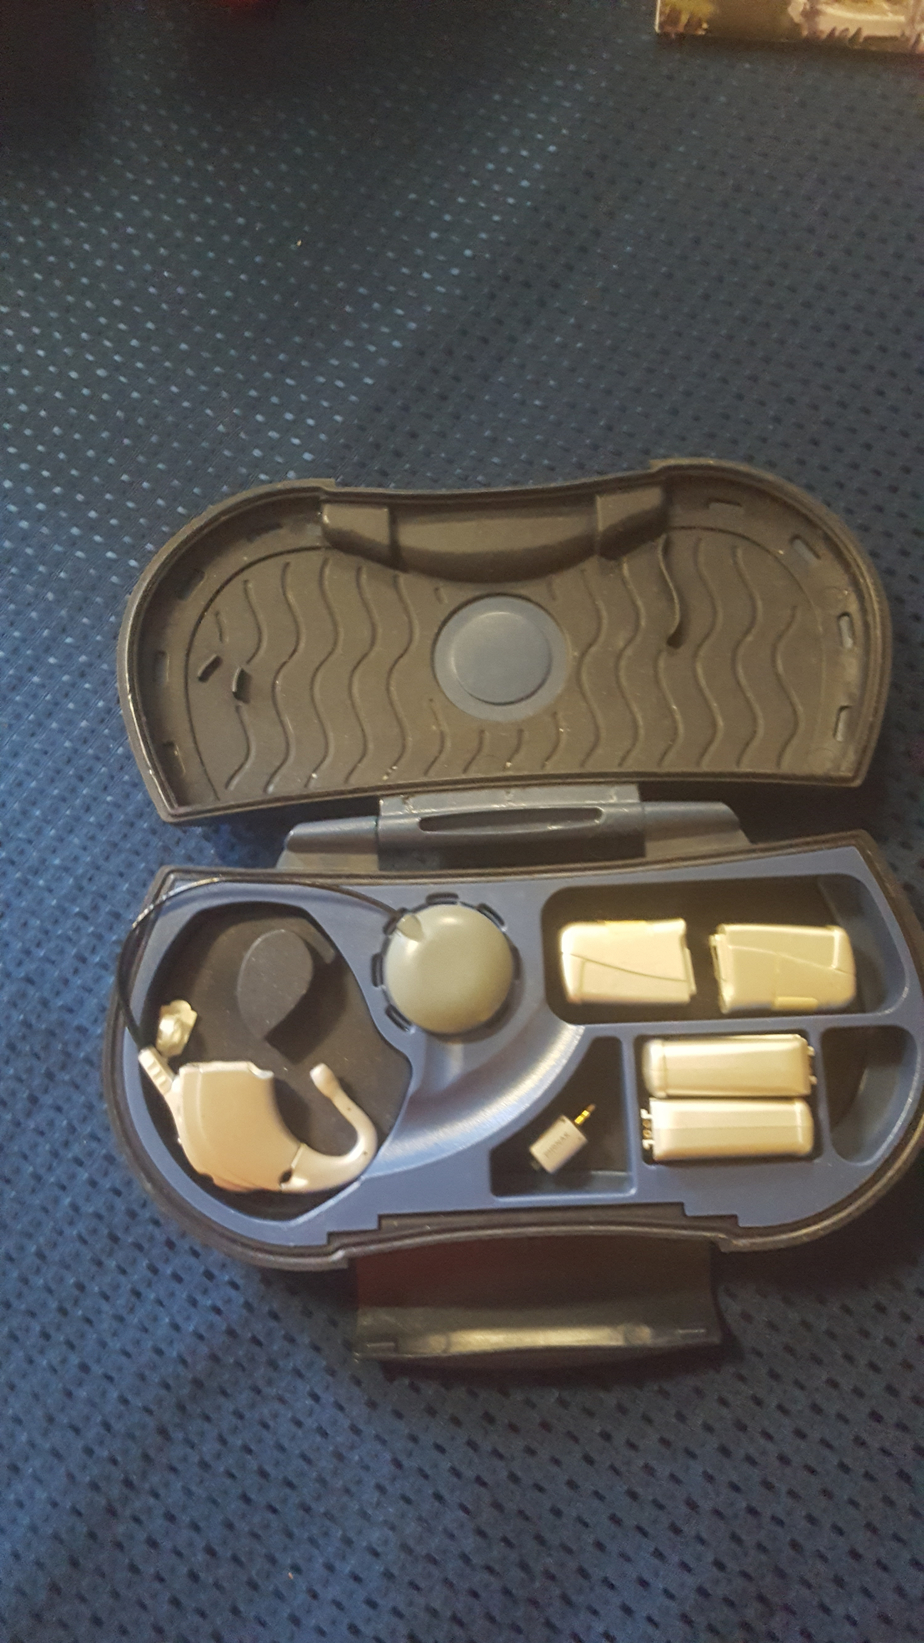 Pictured here is a box of hearing aid and a sound processor for Inef's cochlear implant. Those are the assistive devices Inef uses to help her hear better. 